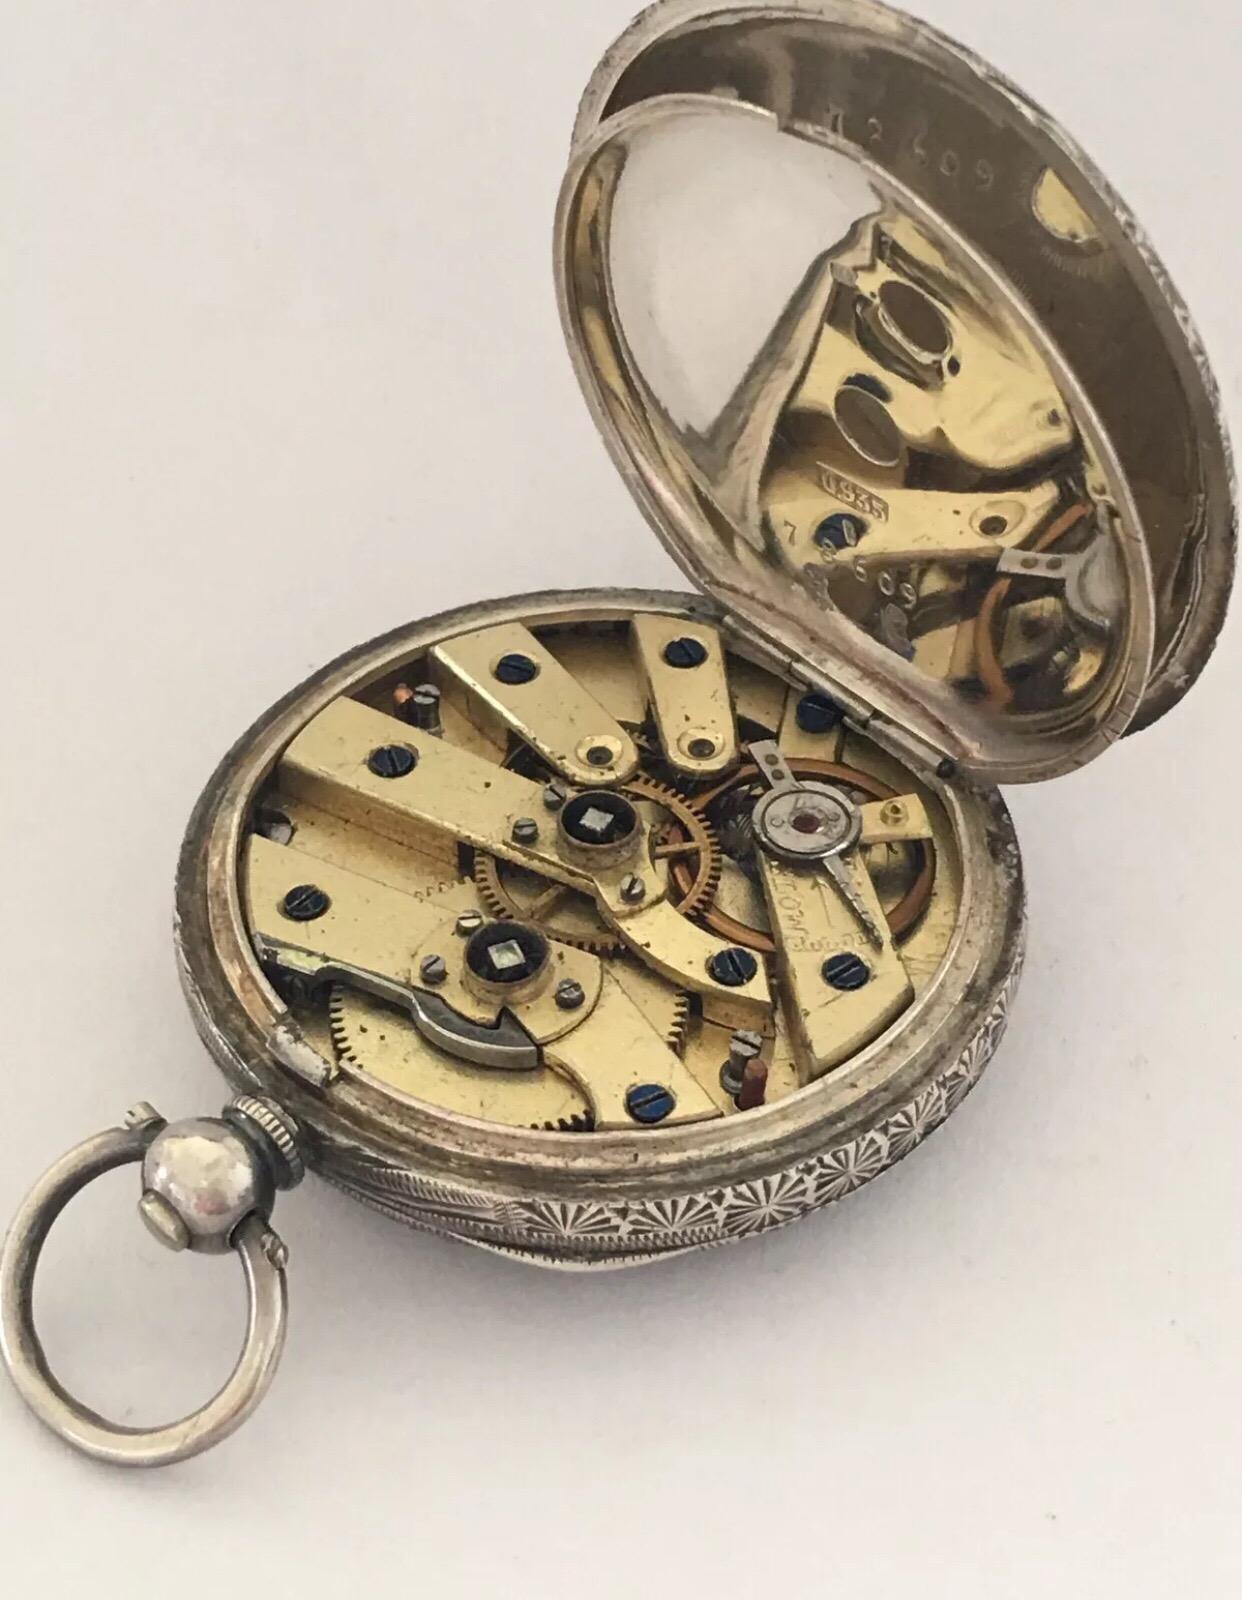 Antique Silver with Pink Enamel and Gold Inlaid Dial Key Wind Pocket Watch 4